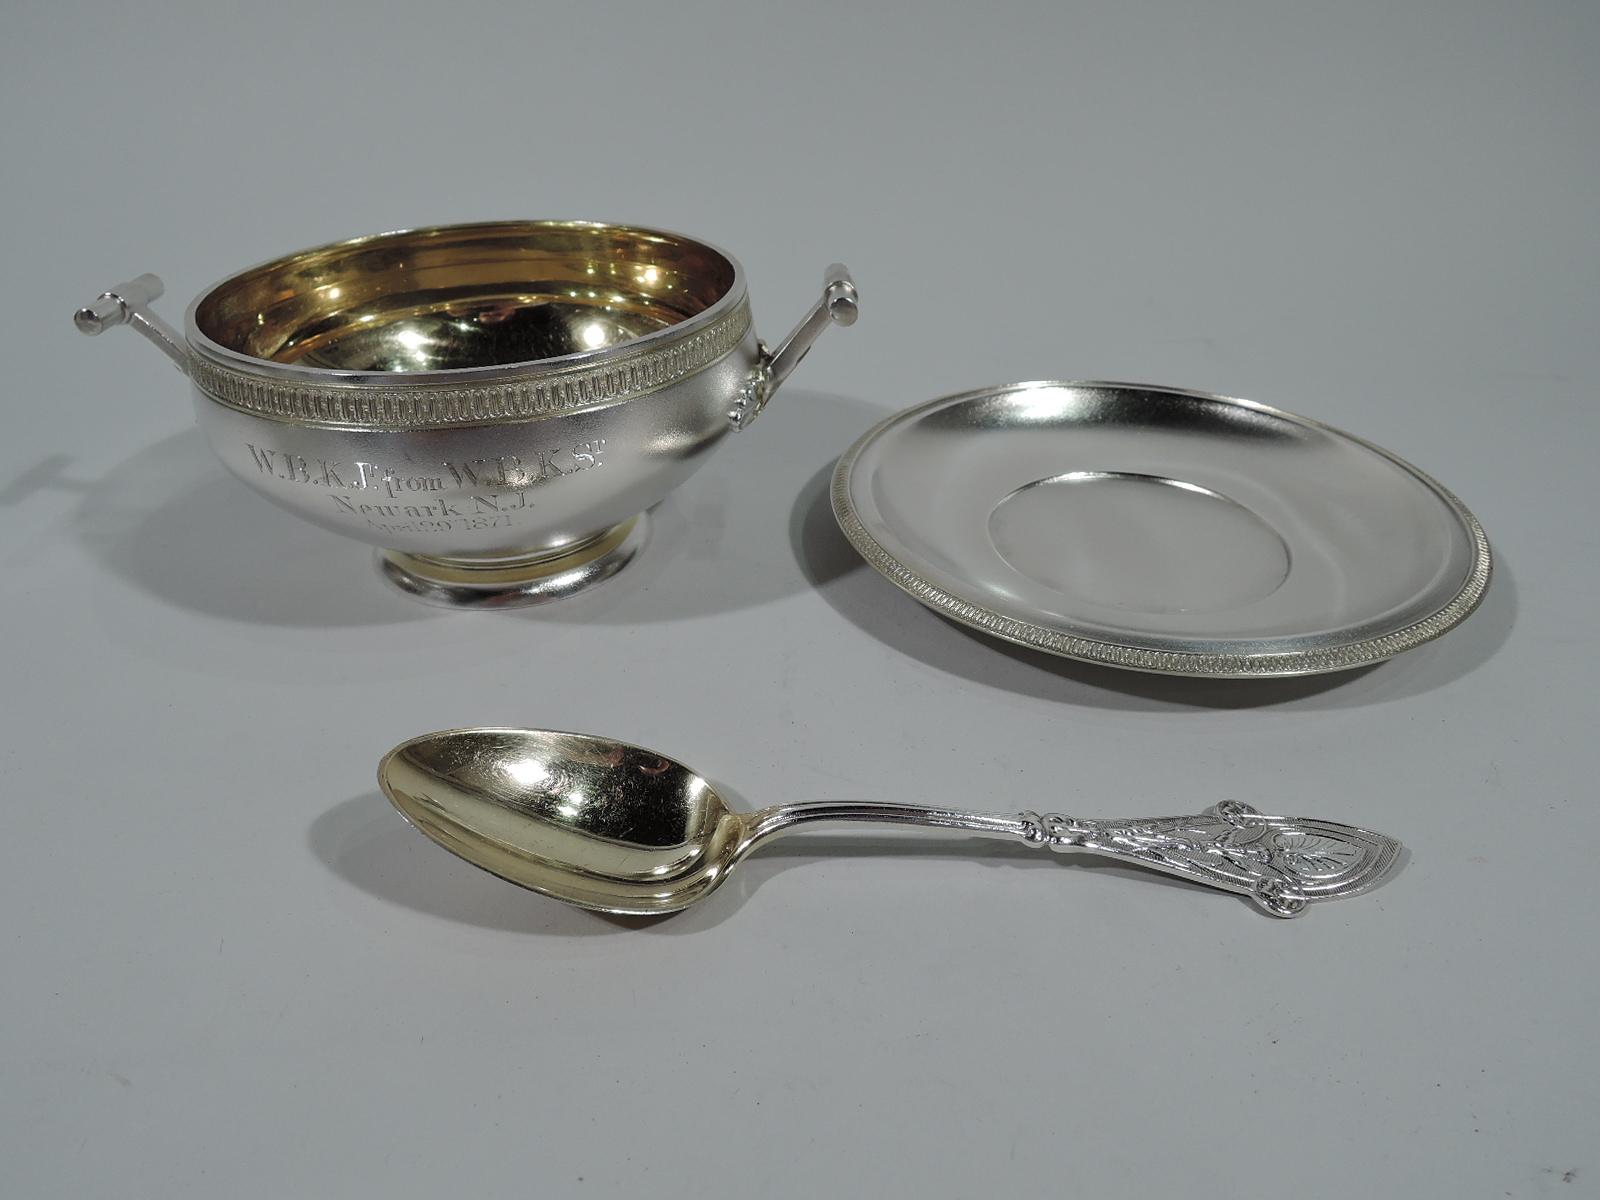 Early gilt-washed sterling silver sauce bowl on stand with butler finish. Made by Tiffany & Co. in New York. Round and tapering bowl with gilt interior and raised foot. Side handles in form of post inserted with short perpendicular column and